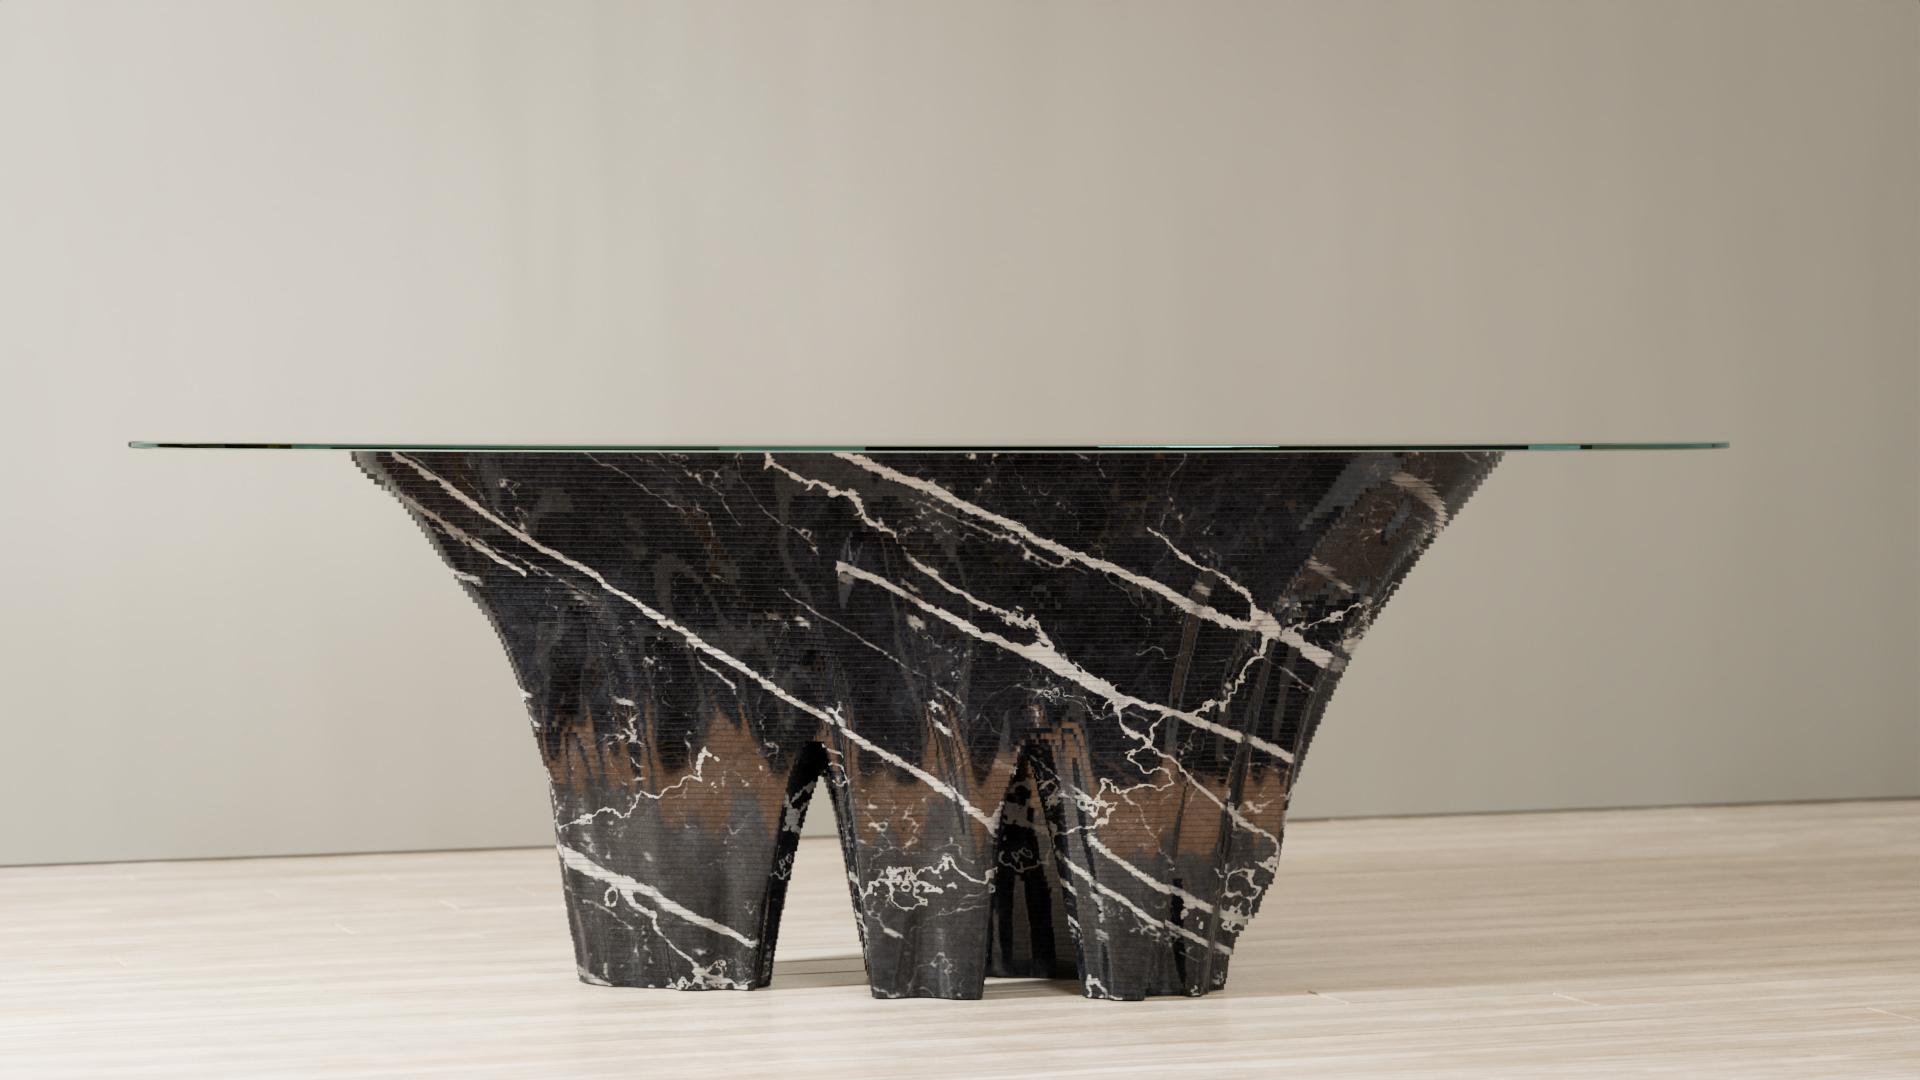 Unique dining table edition of Duffy London's Monument Valley design. 

A visual tribute to the rich desert landscapes; marrying contemporary design with luxurious Italian marble to create an enthralling new centerpiece for the living space.

A